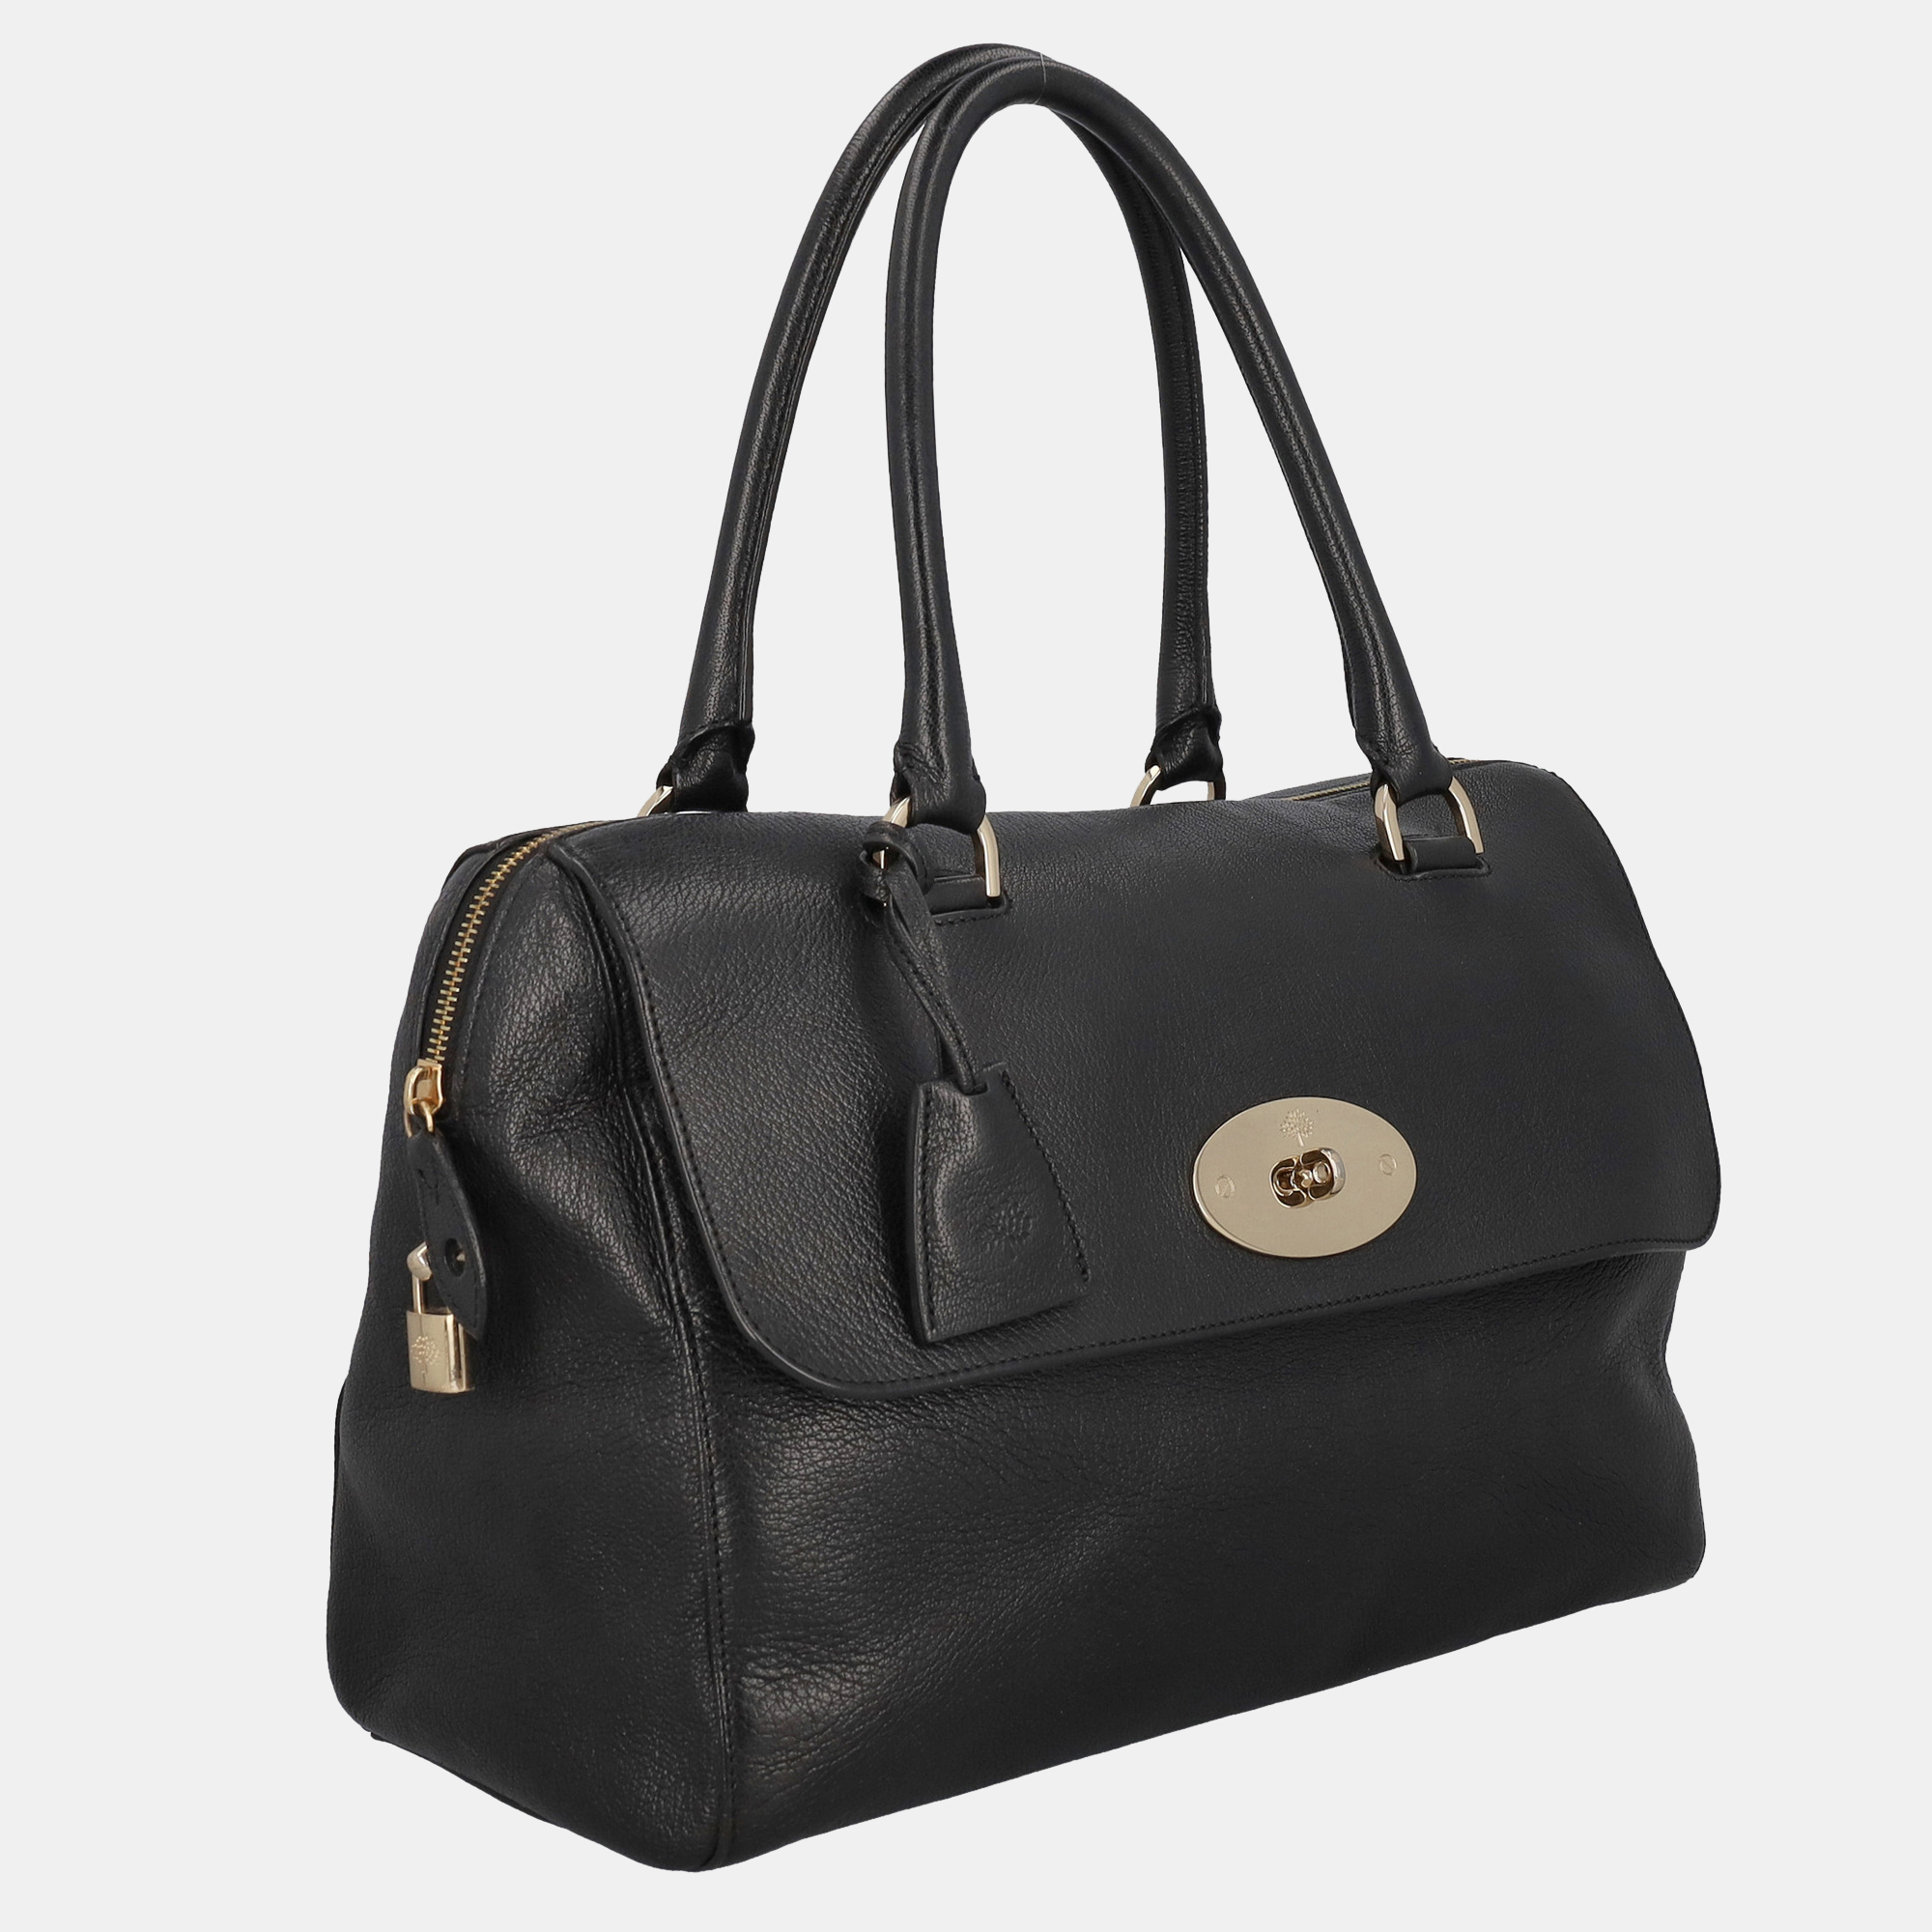 Mulberry  Women's Leather Tote Bag - Black - One Size